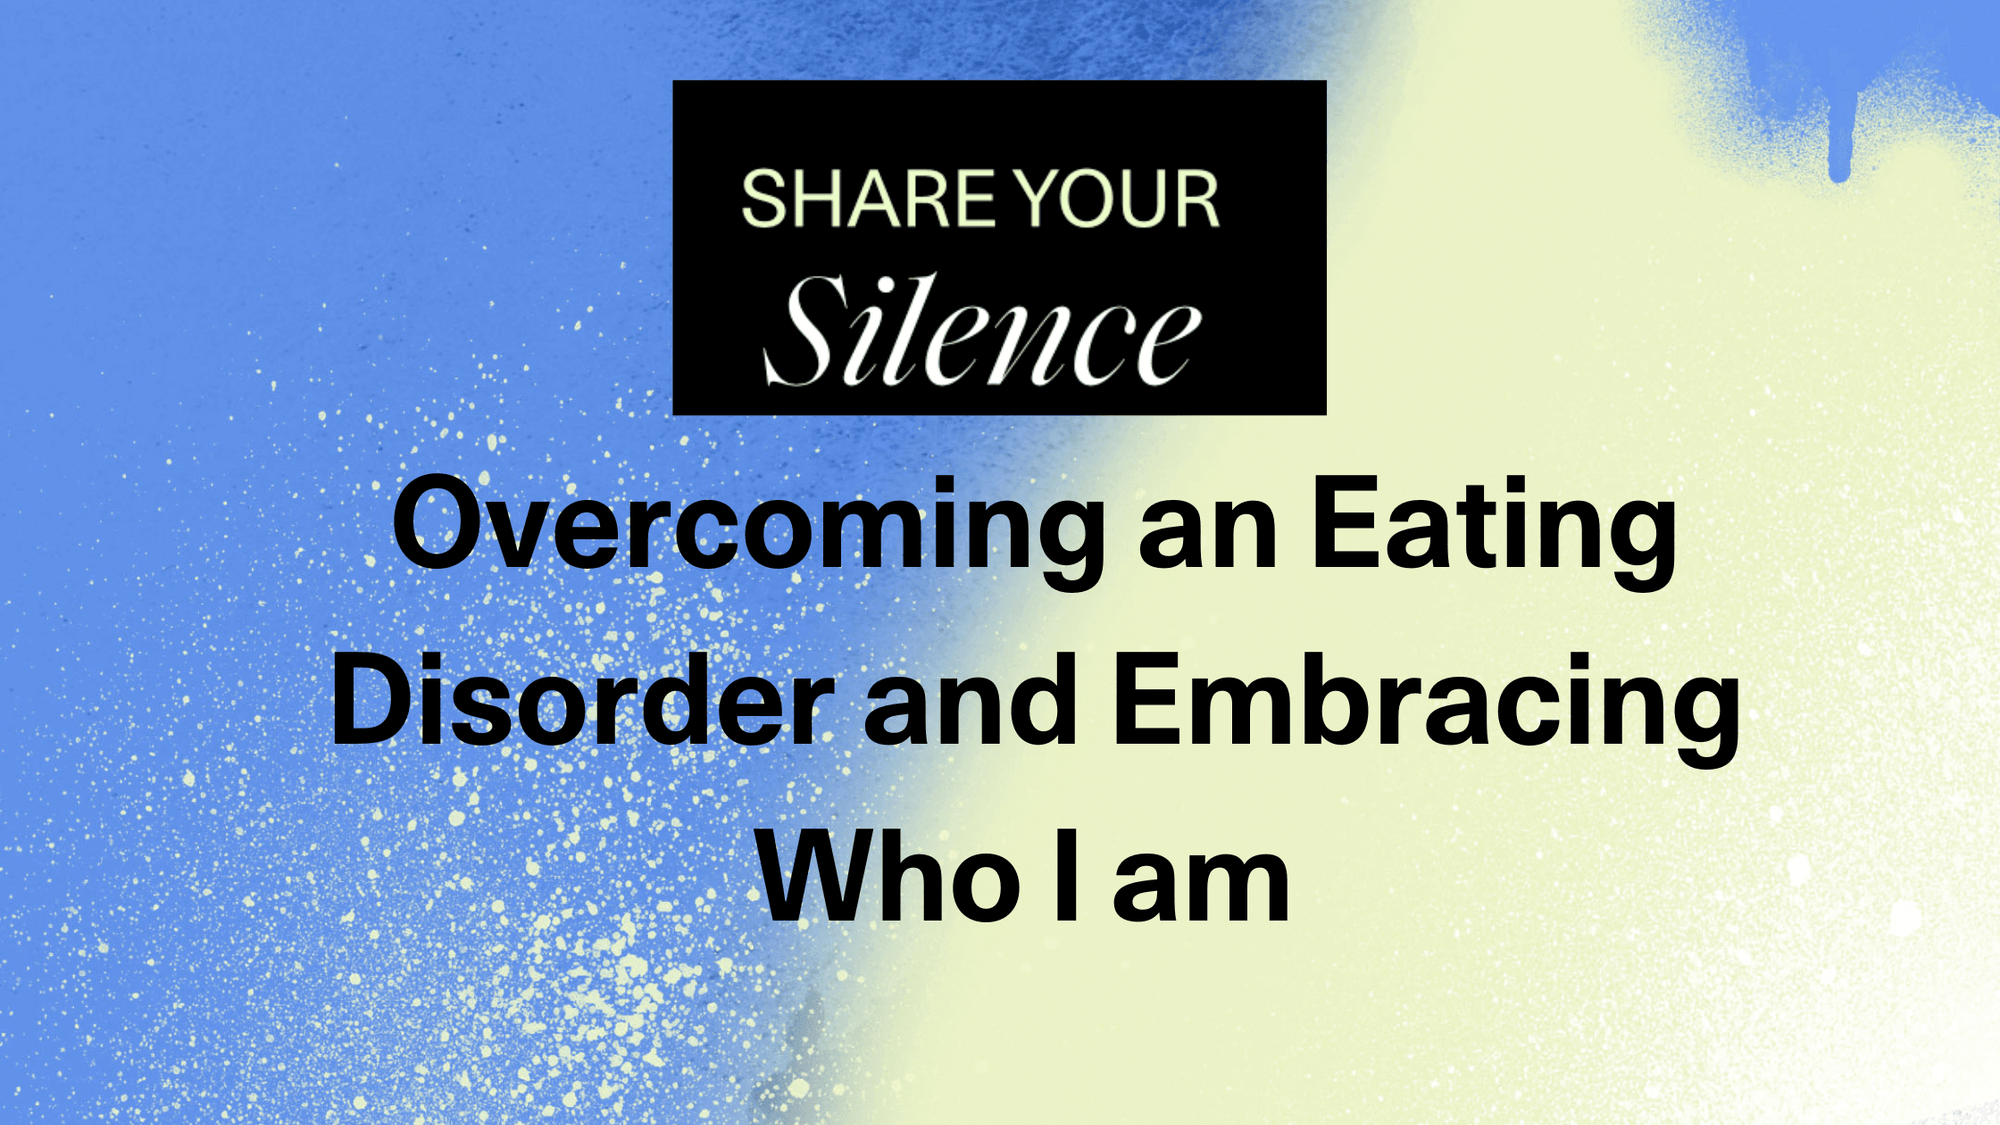 Share your silence: overcoming an eating disorder and embracing who I am